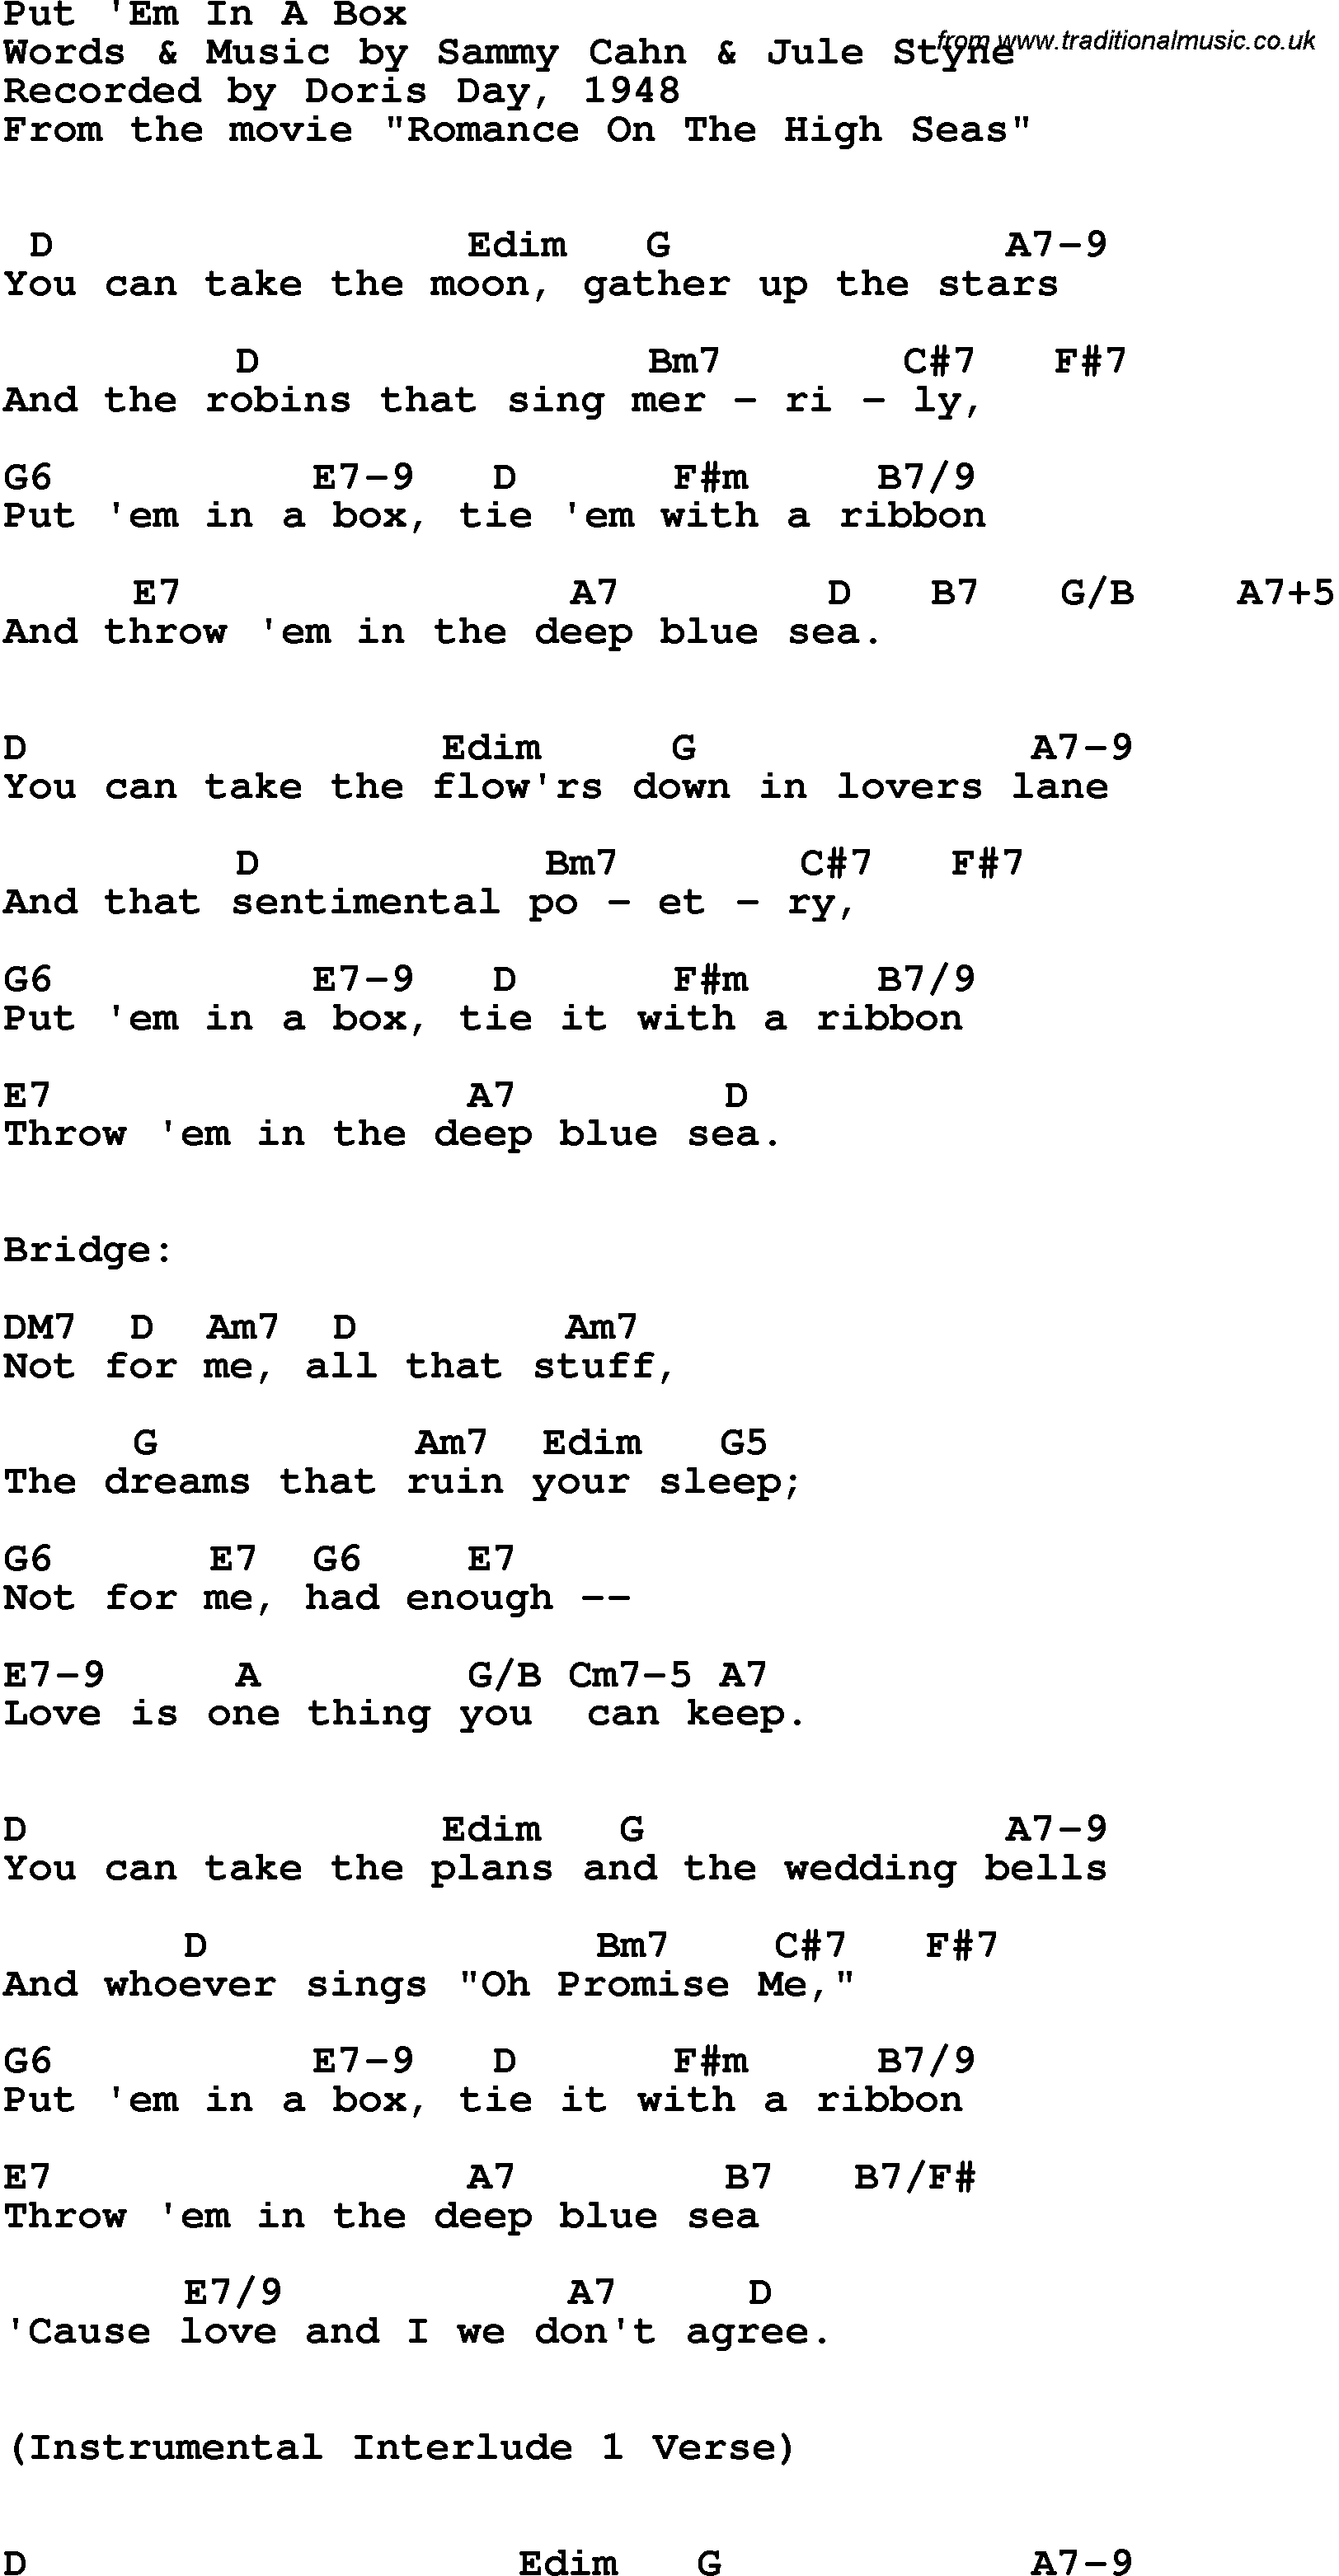 Song Lyrics with guitar chords for Put 'em In A Box - Doris Day, 1948